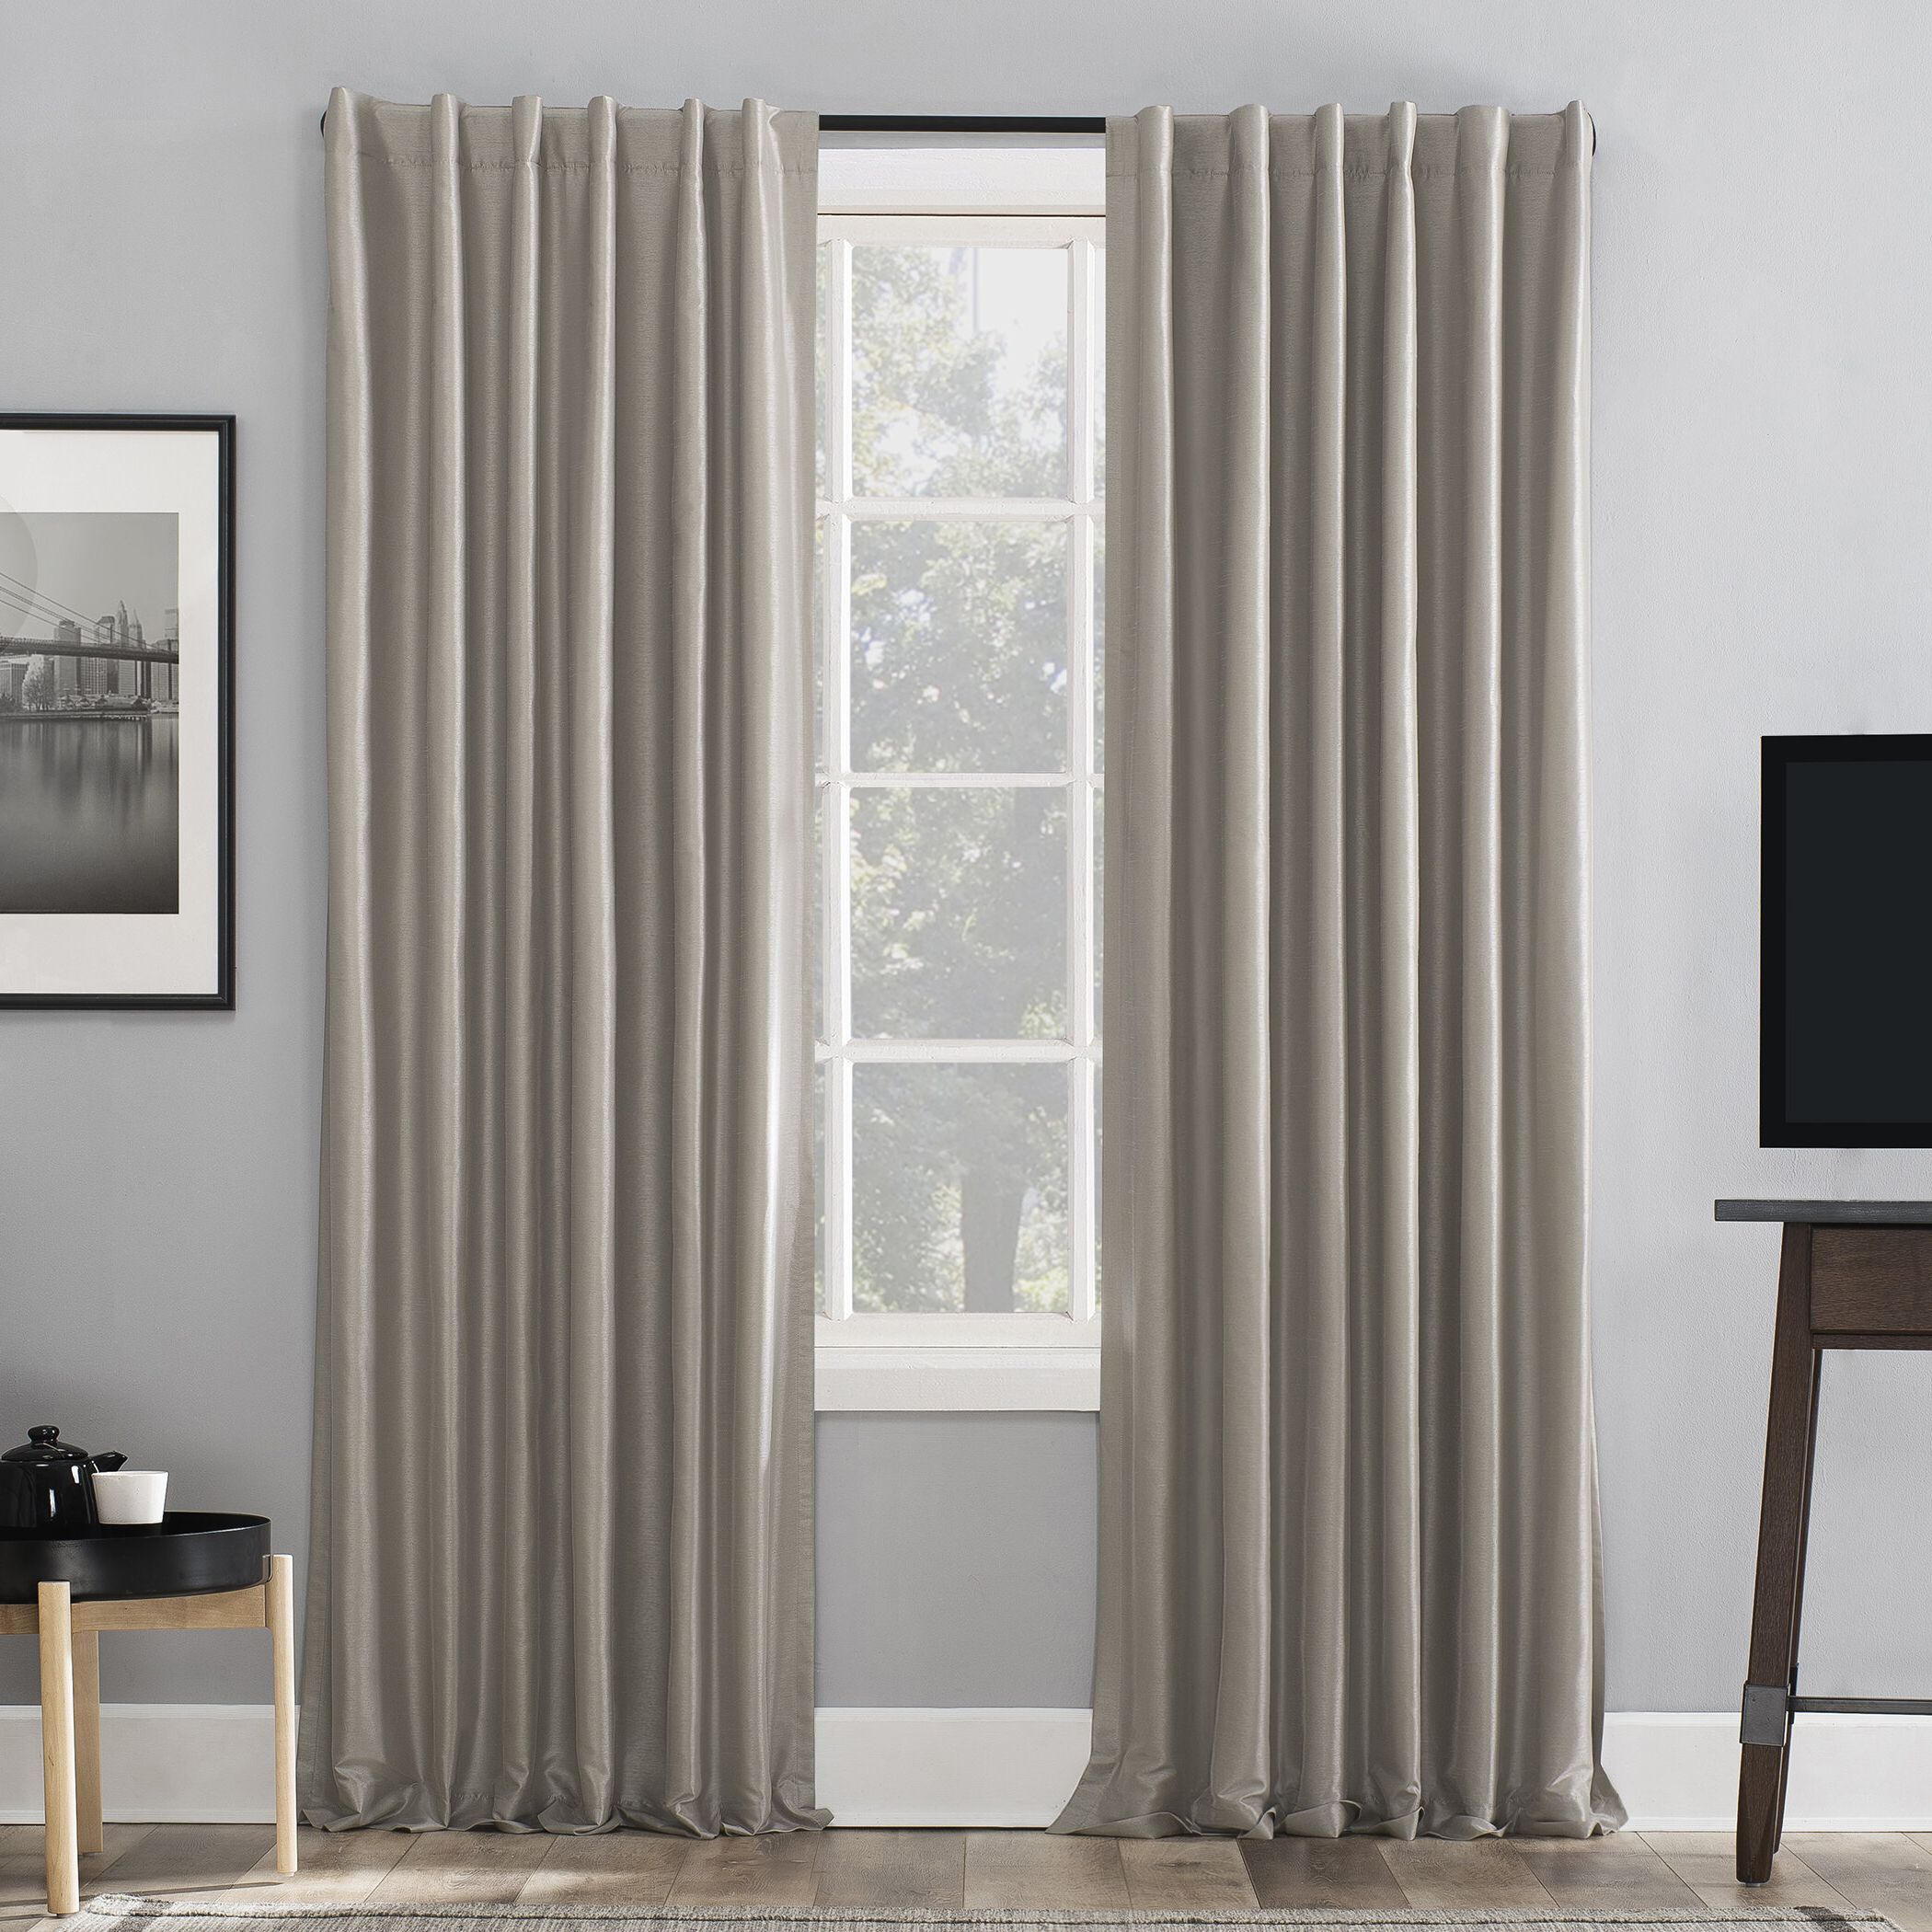 Evelina Faux Dupioni Silk Extreme Solid Max Blackout Thermal Tab Top Single  Curtain Panel Throughout Best And Newest Evelina Faux Dupioni Silk Extreme Blackout Back Tab Curtain Panels (View 1 of 20)